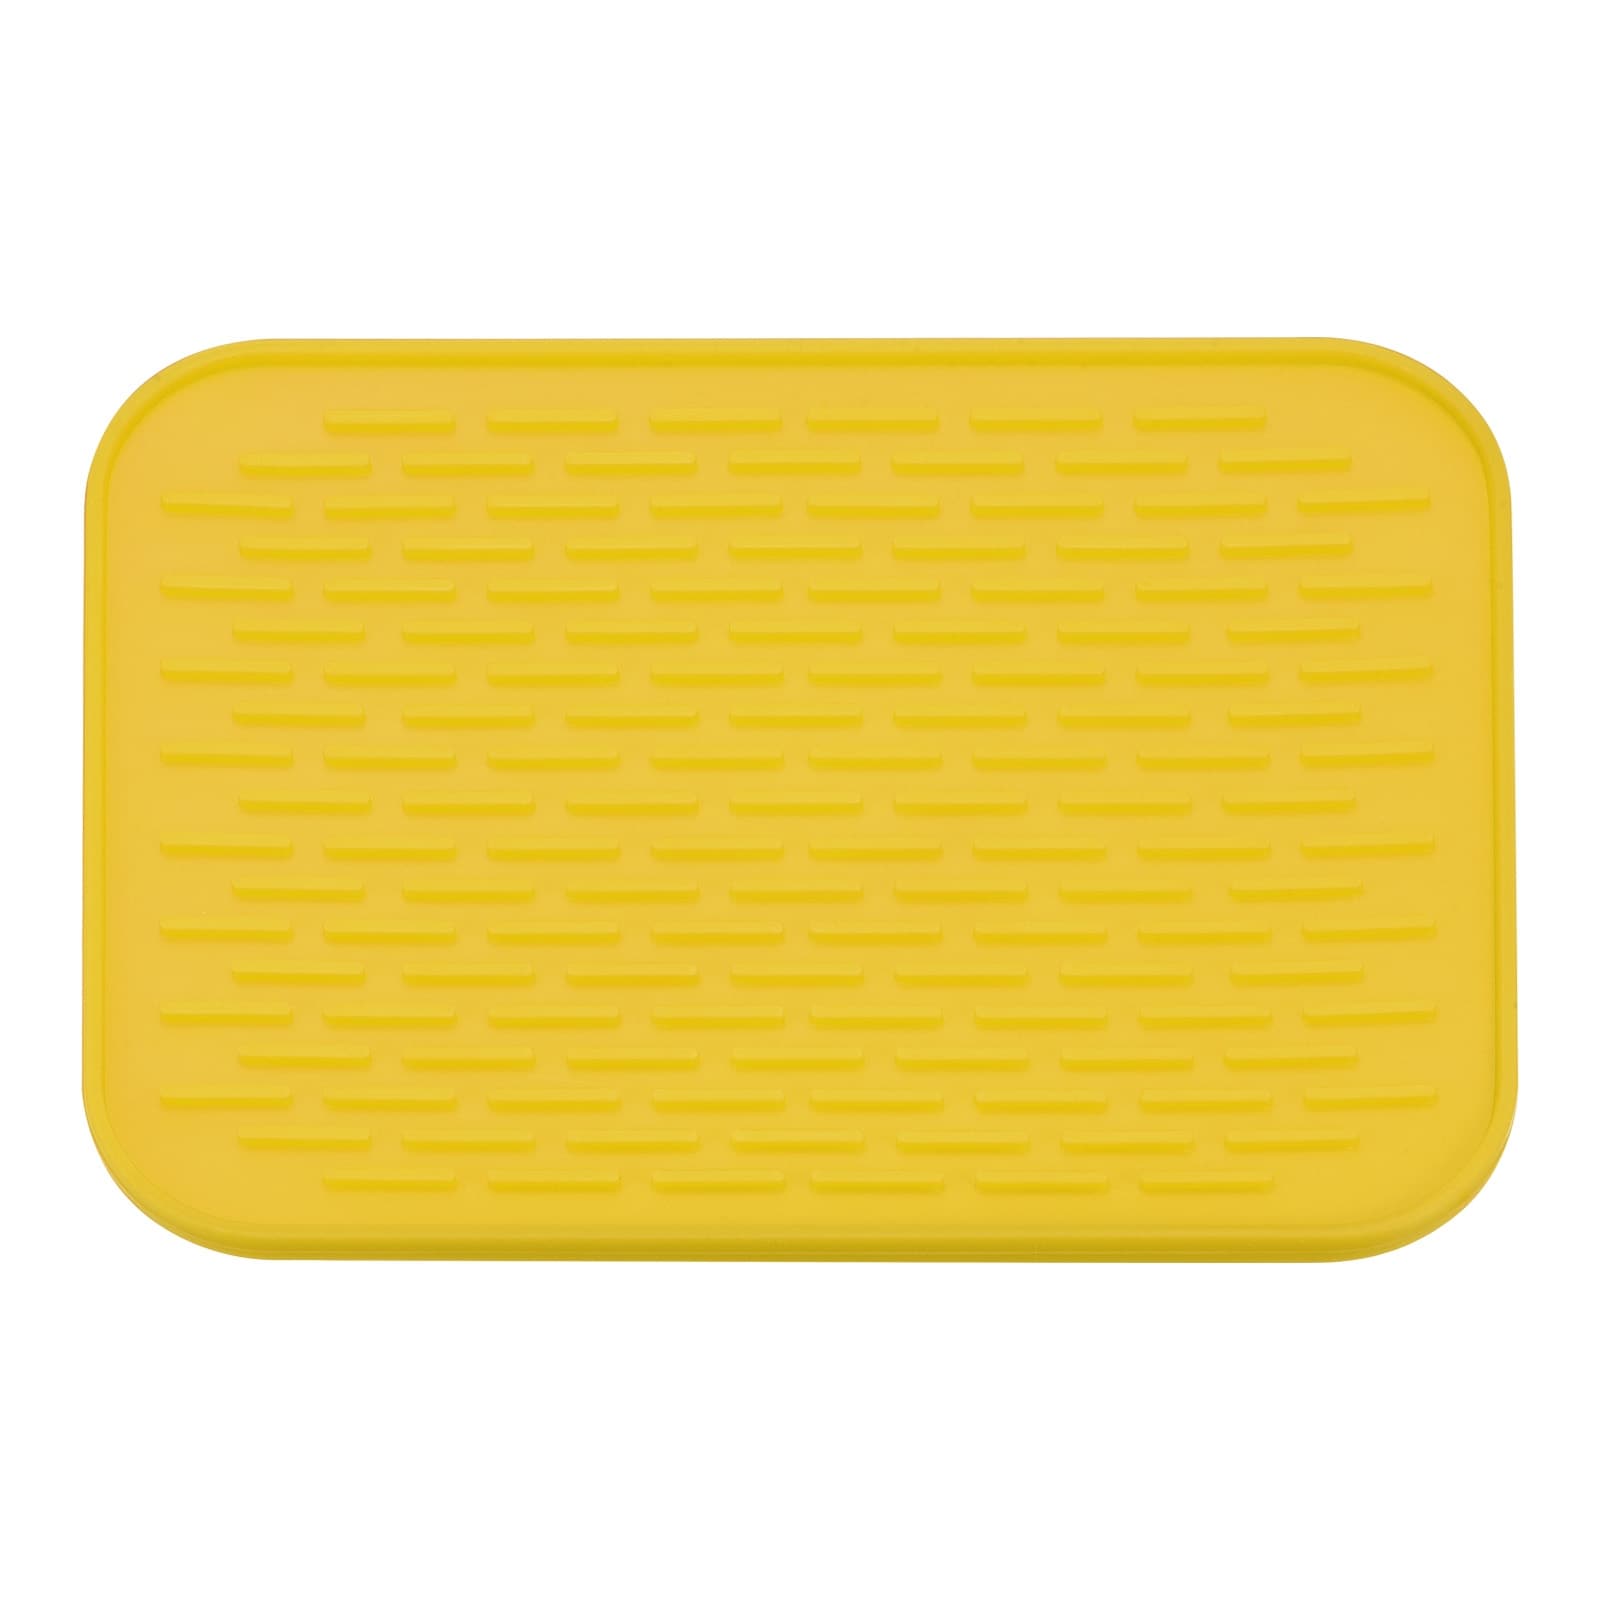 Cheer Collection Silicone Dish Drying Mat for Kitchen Counter, Silicone  Drying Pad and Trivet for Dishes, Dishwasher Safe and Heat Resistant